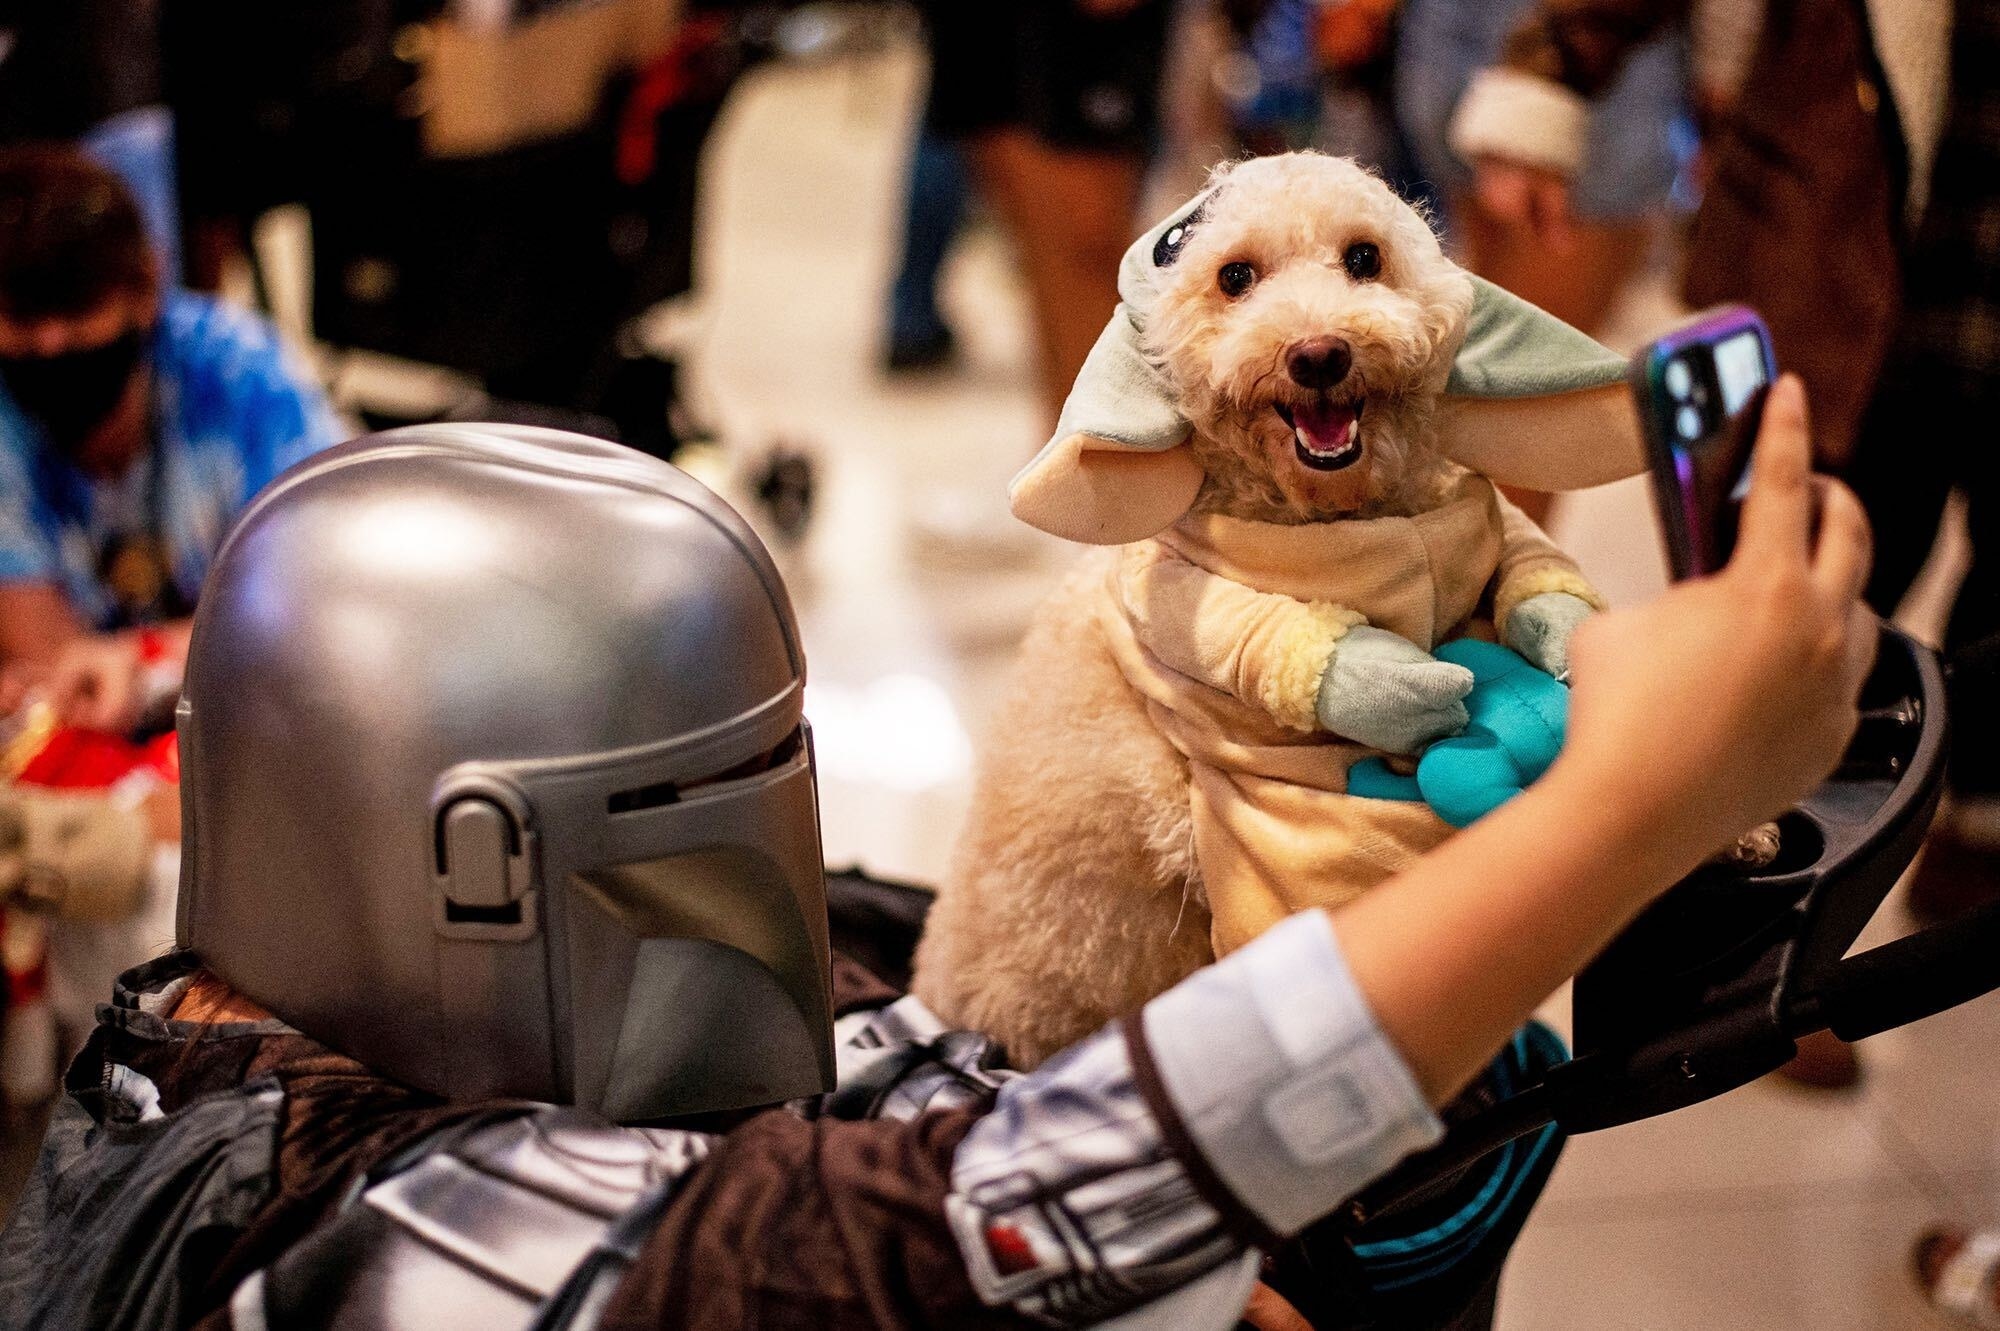 someone in a mandalorian mask takes a selfie with their dog, who is a fluffy tan guy dressed as yoda